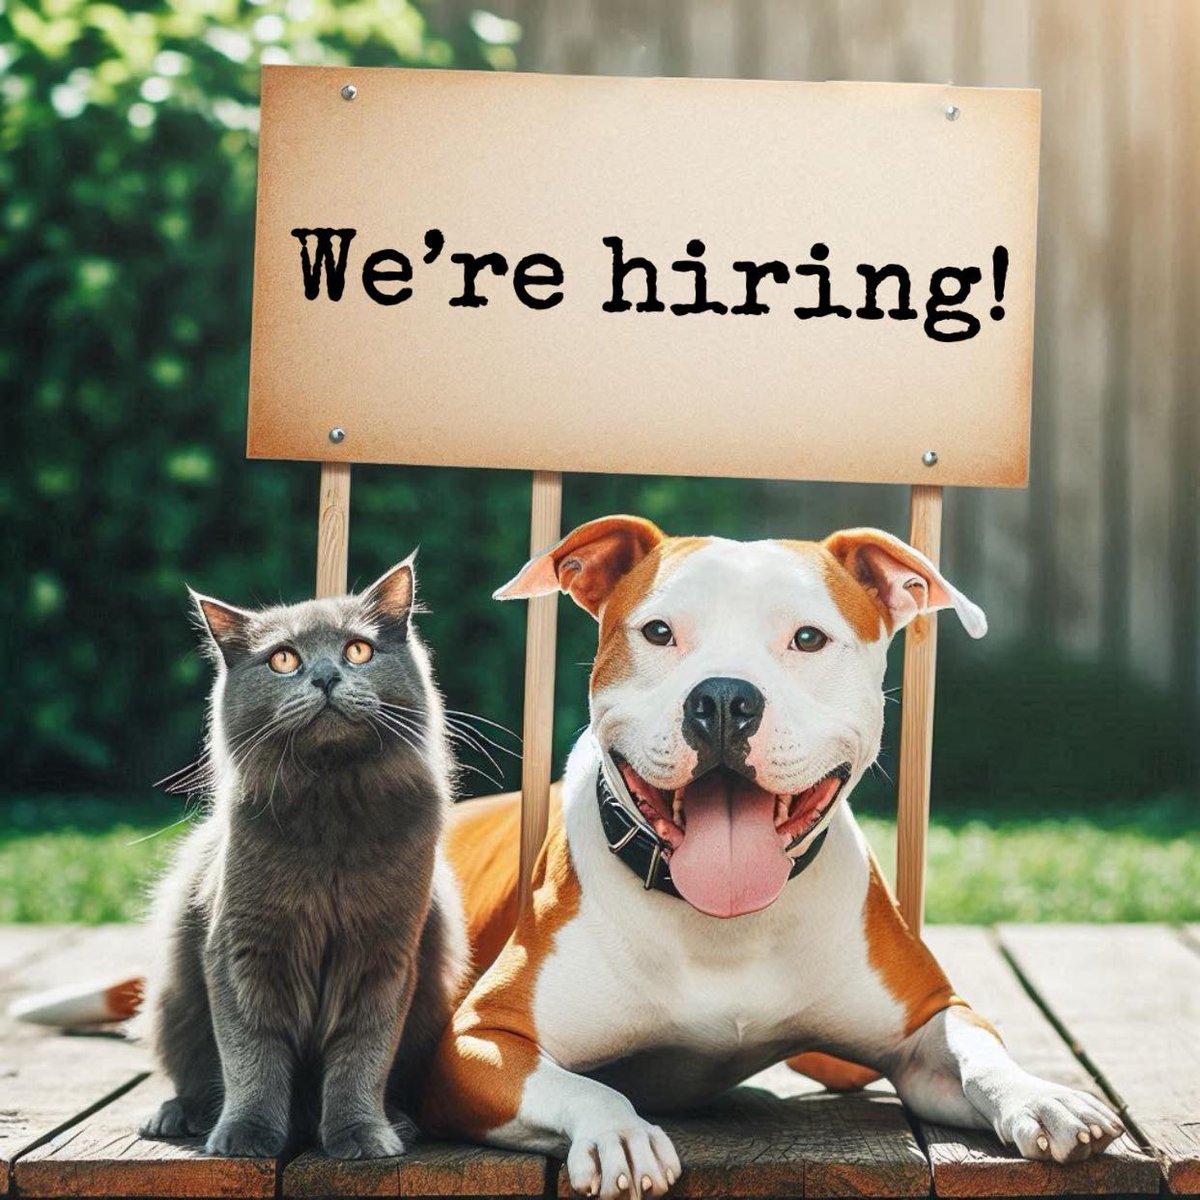 CACC Hiring! Calling all Animal Advocates! Help people & animals! These positions are open NOW! Apply this week: chi.gov/caccjobs #CACC #Careers #ChicagoAnimals #NewPosition